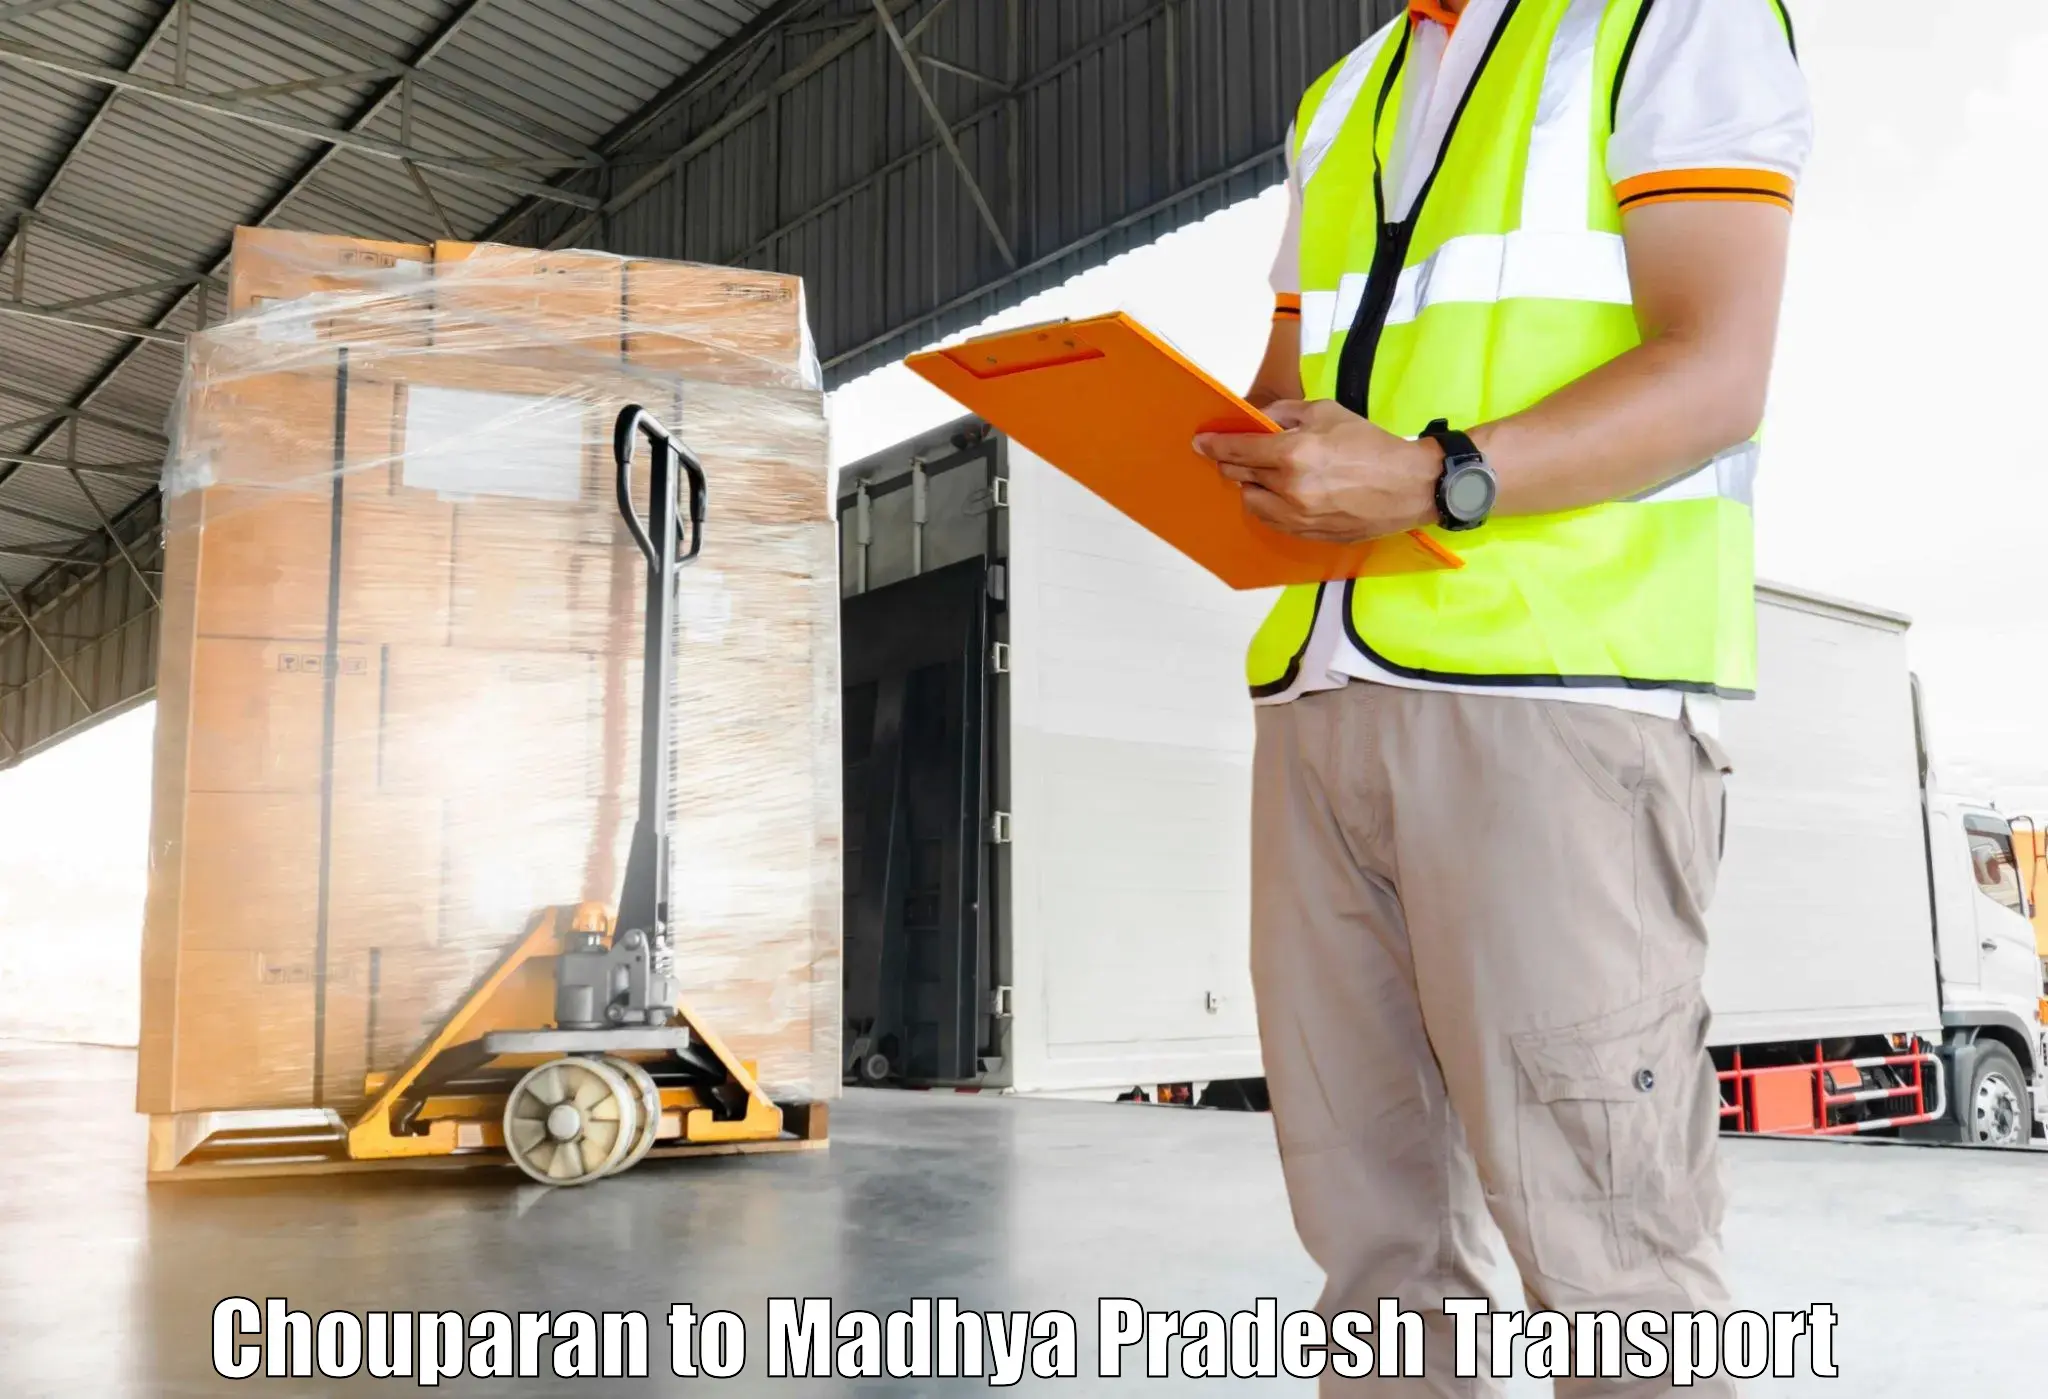 Commercial transport service Chouparan to Gotegaon